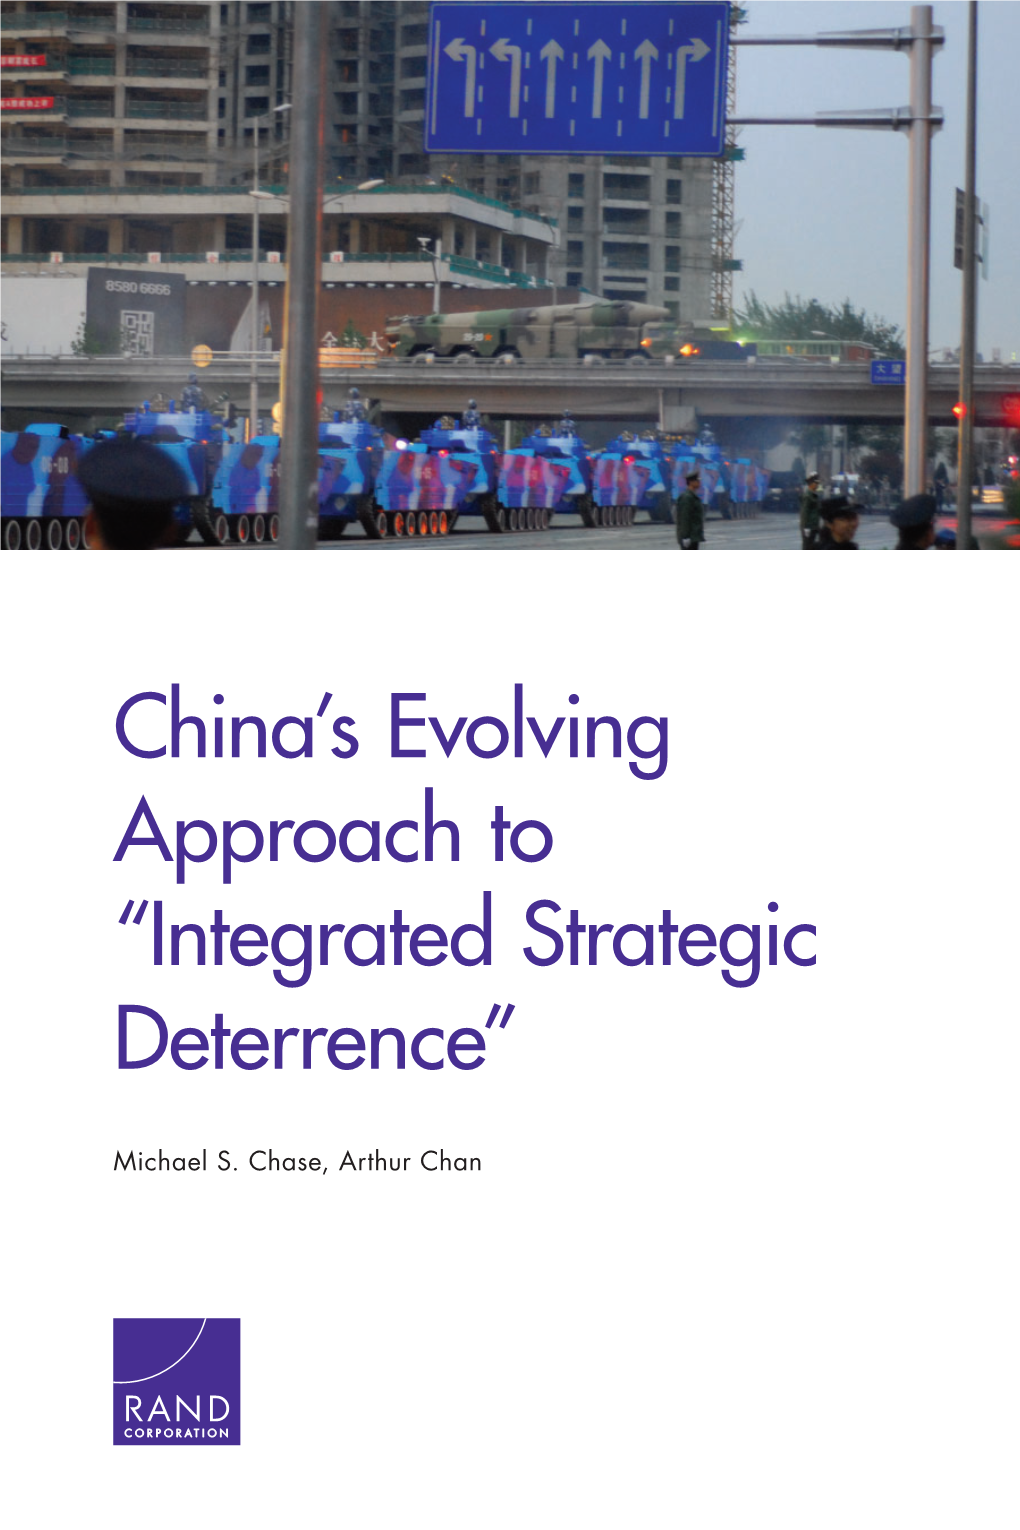 China's Evolving Approach to "Integrated Strategic Deterrence"